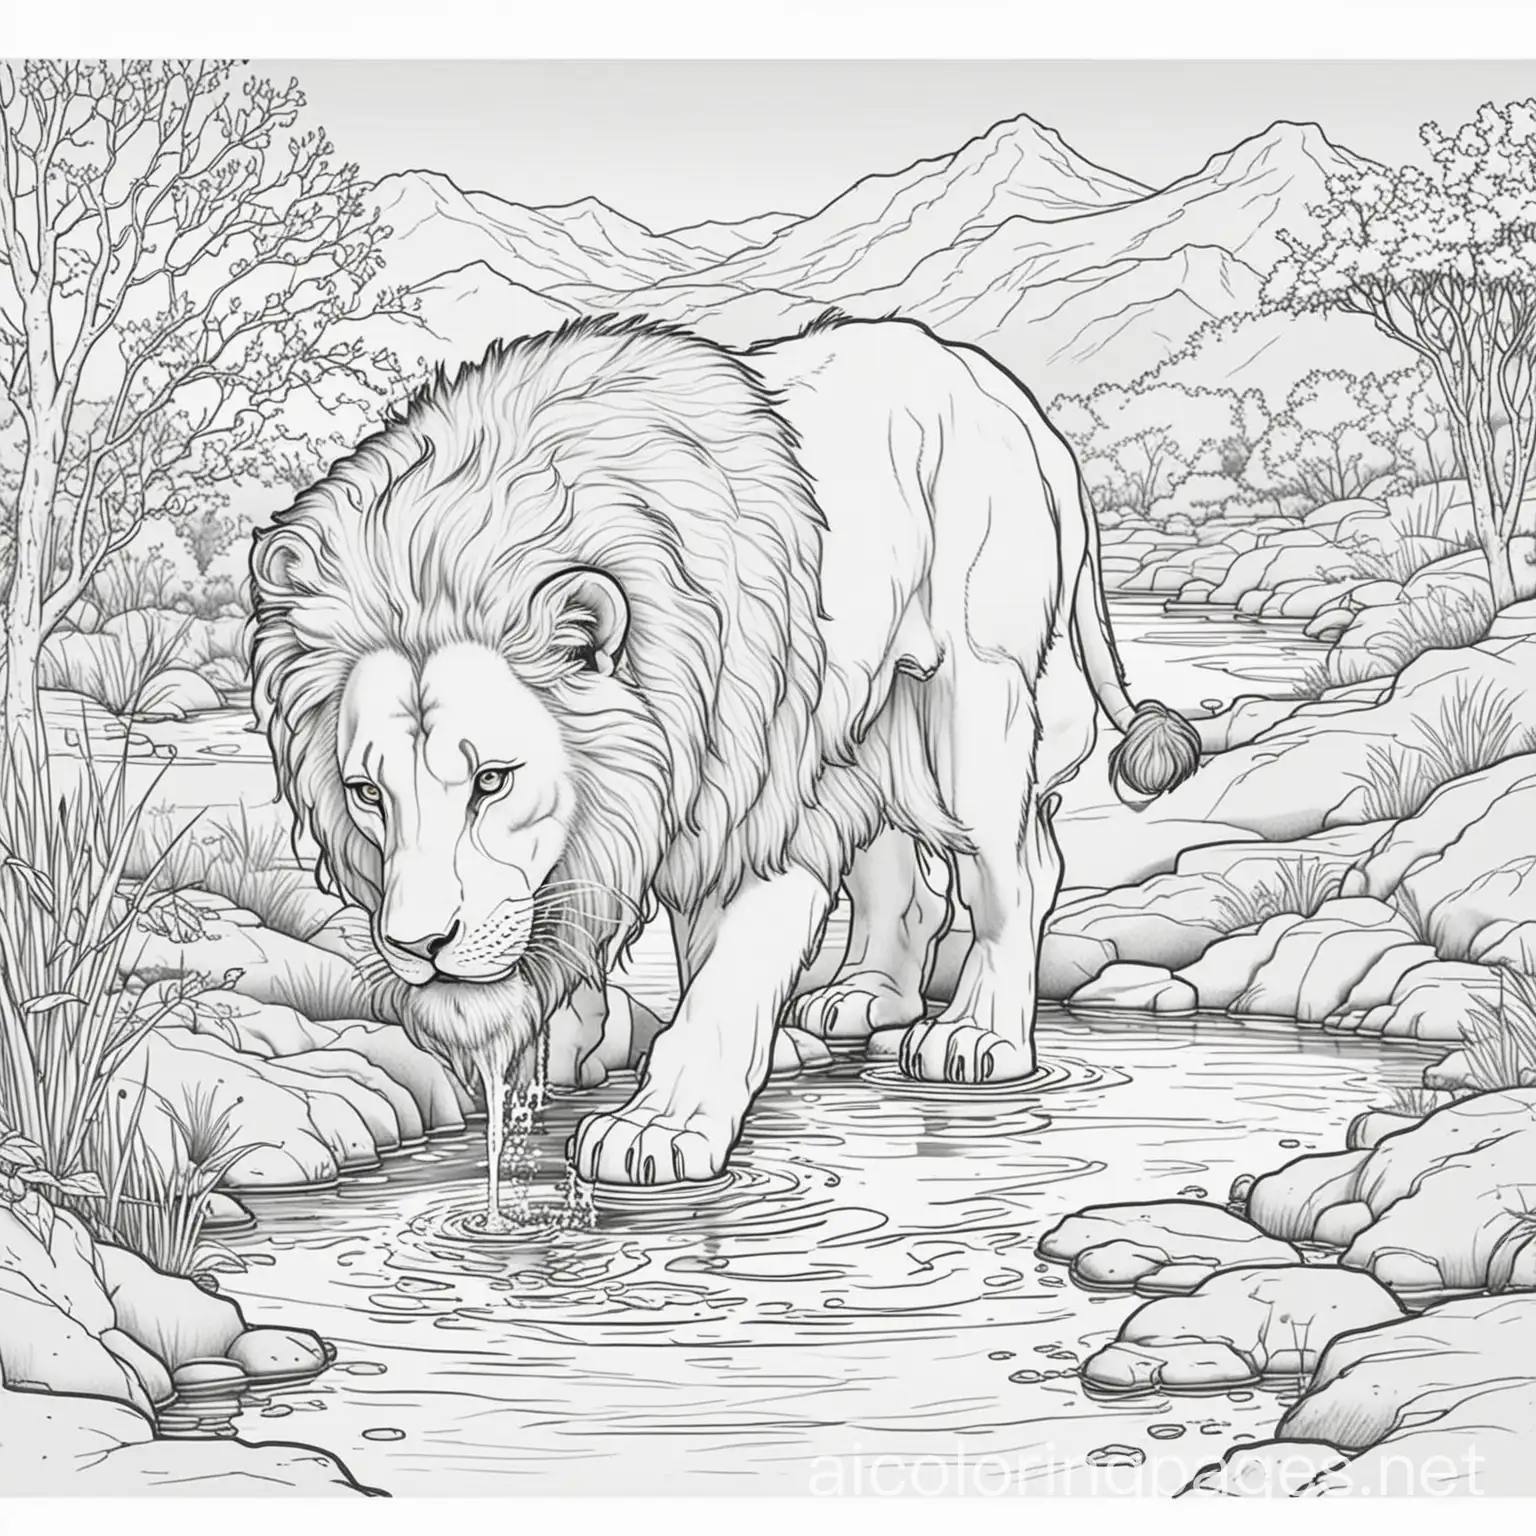 lion drinking water from river outline, cartoon, coloring book page,, Coloring Page, black and white, line art, white background, Simplicity, Ample White Space. The background of the coloring page is plain white to make it easy for young children to color within the lines. The outlines of all the subjects are easy to distinguish, making it simple for kids to color without too much difficulty